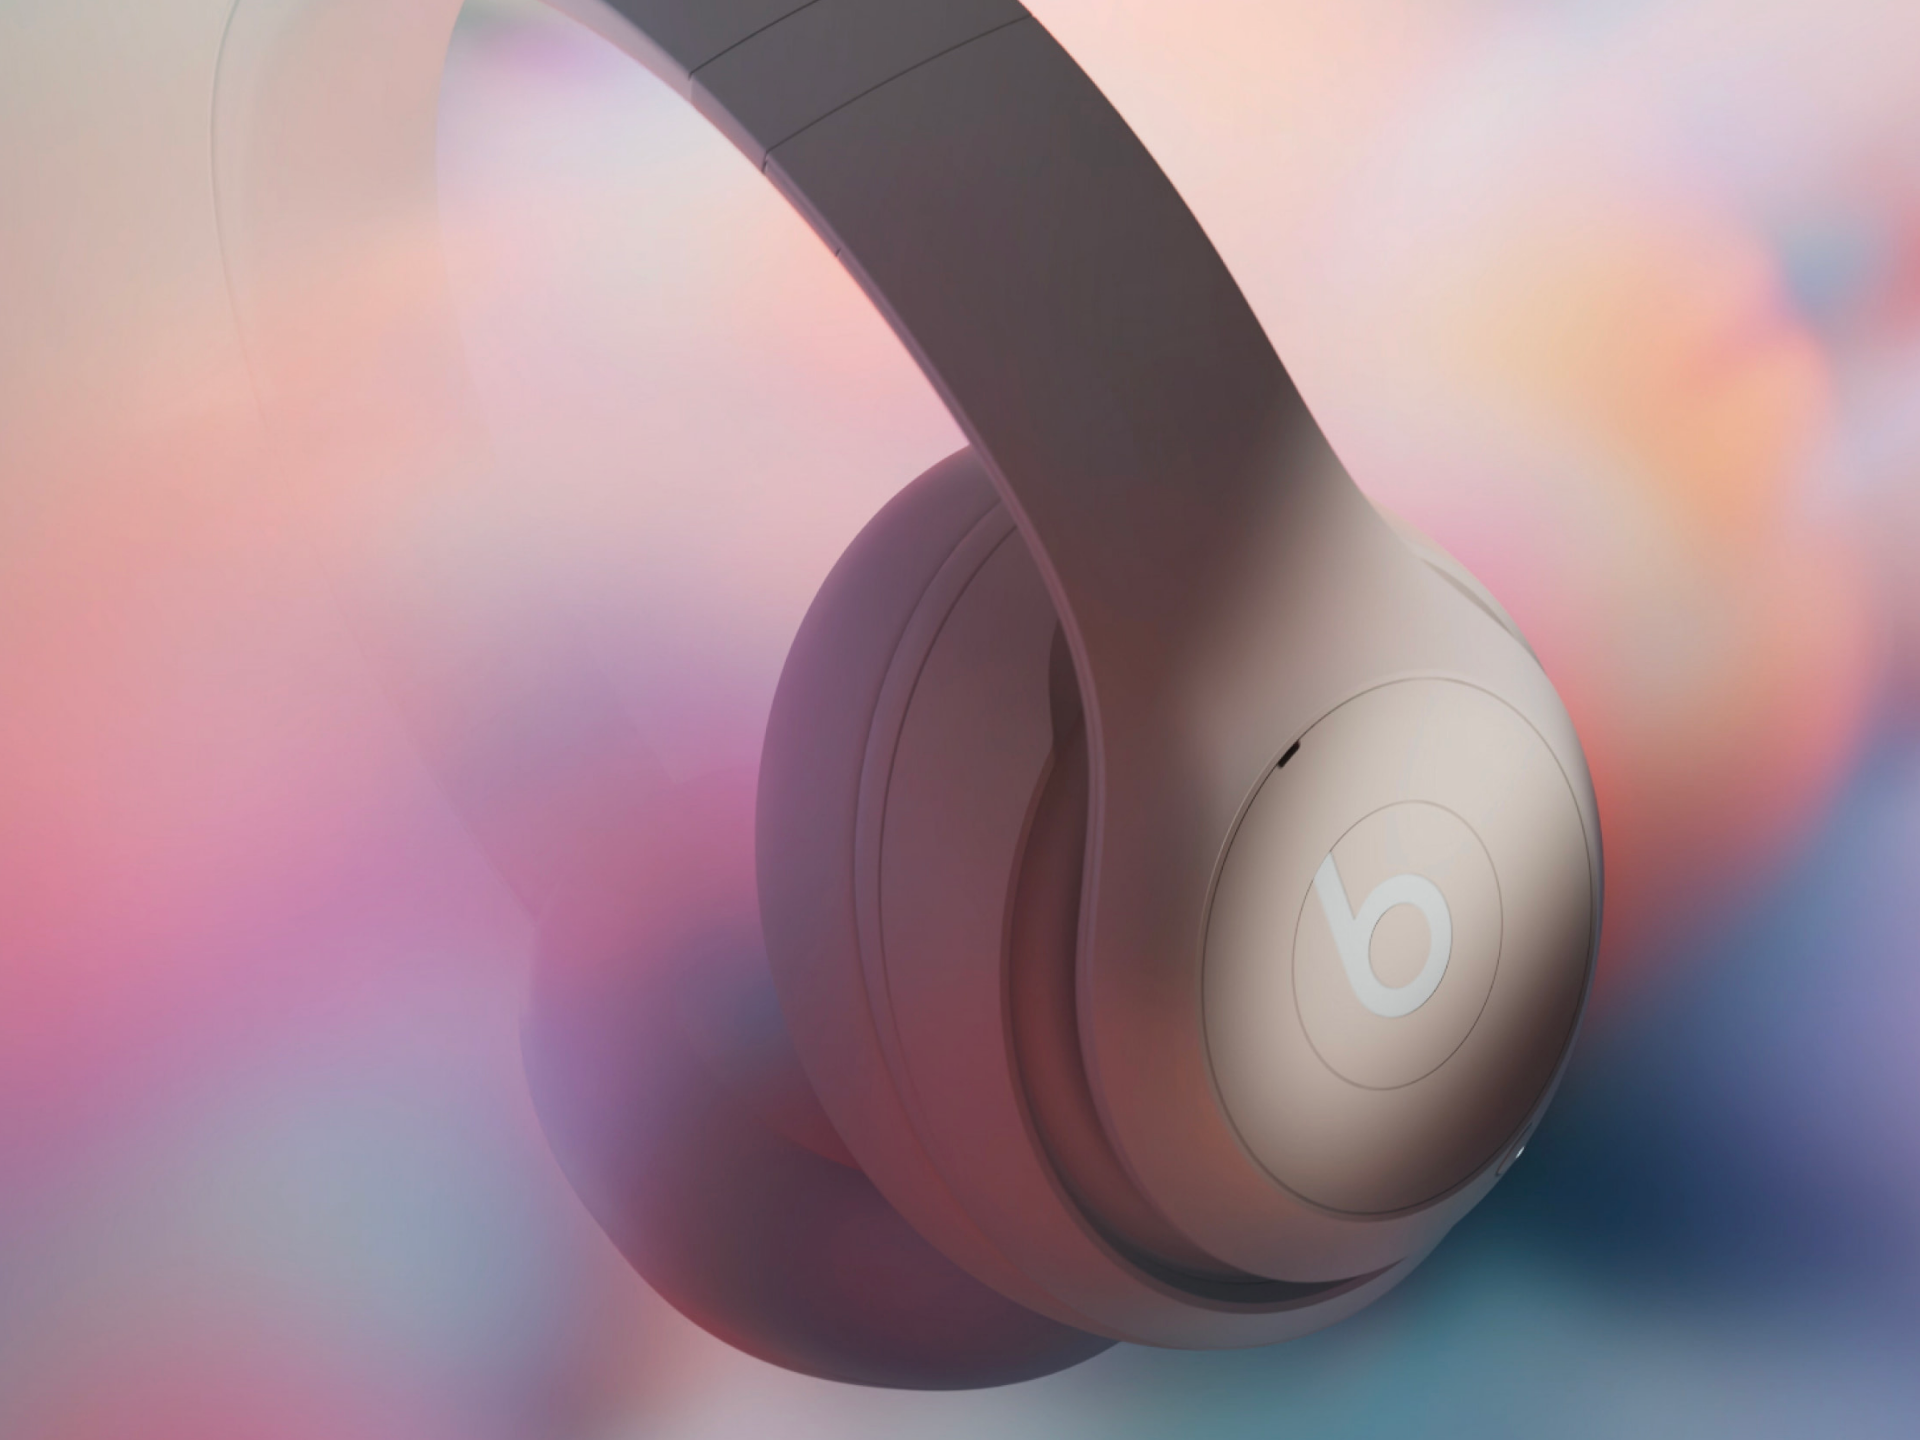 Read more about the article Apple’s new Beats Studio Professional headphones are at the moment $100 off